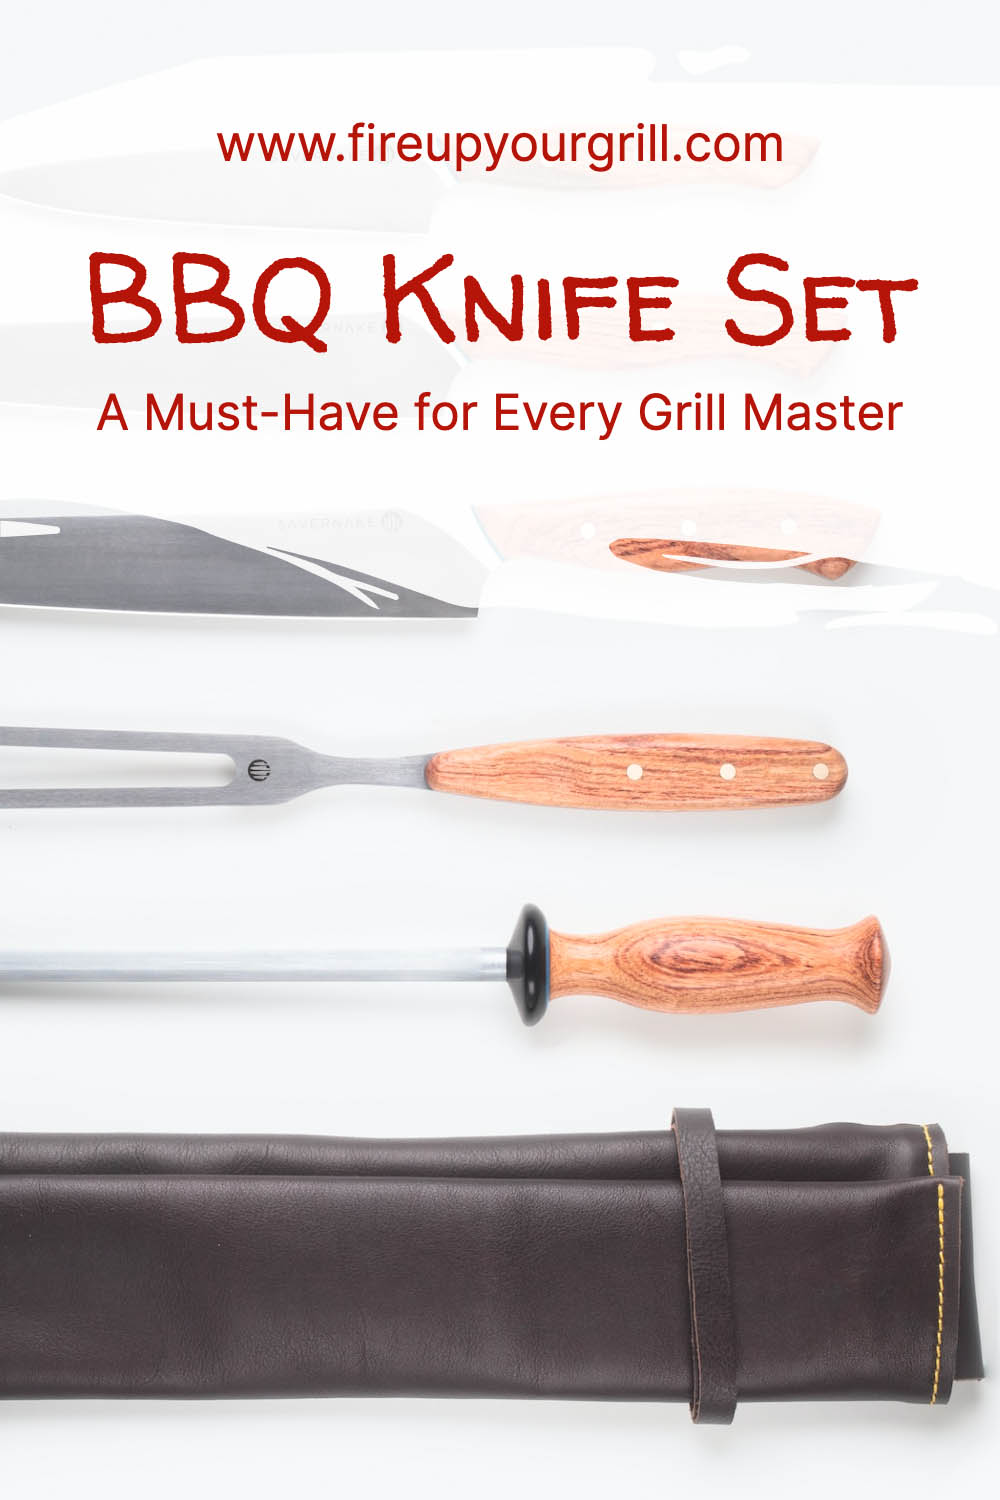 BBQ Knife Set: A Must-Have for Every Grill Master